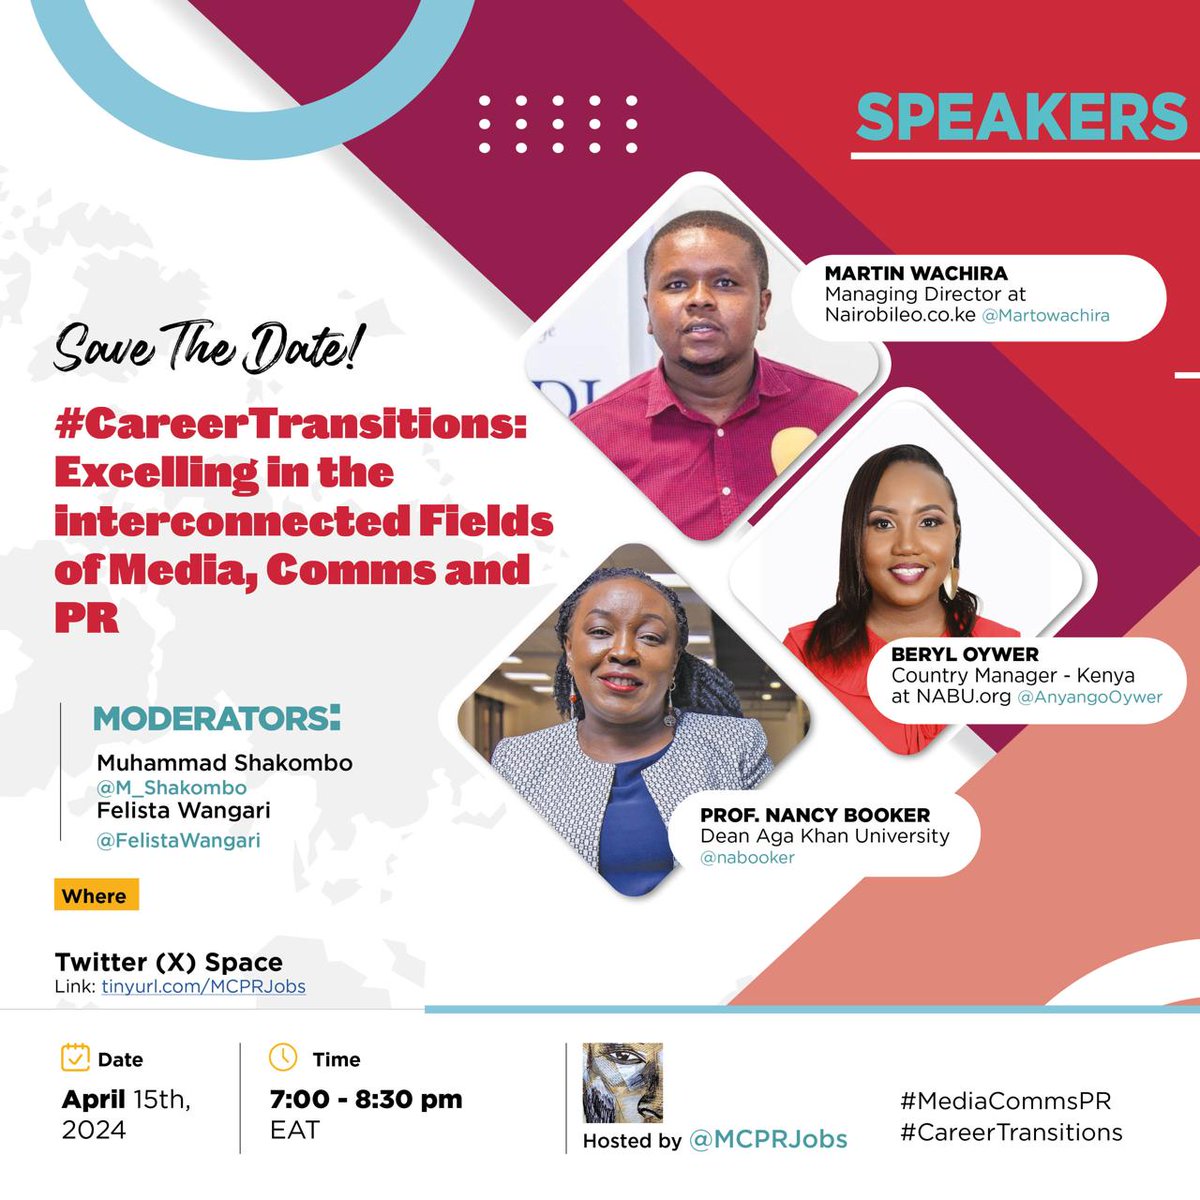 Upcoming #MCPRJobs Space ➡️ #CareerTransitions: Excelling in the Interconnected Fields of Media, Comms & PR 🗓️ Monday, April 15; 7pm EAT 🗣️Speakers: @nabooker @Martowachira & @AnyangoOywer Moderators: @M_Shakombo & @FelistaWangari 🔔Set a reminder: x.com/i/spaces/1jMKg…